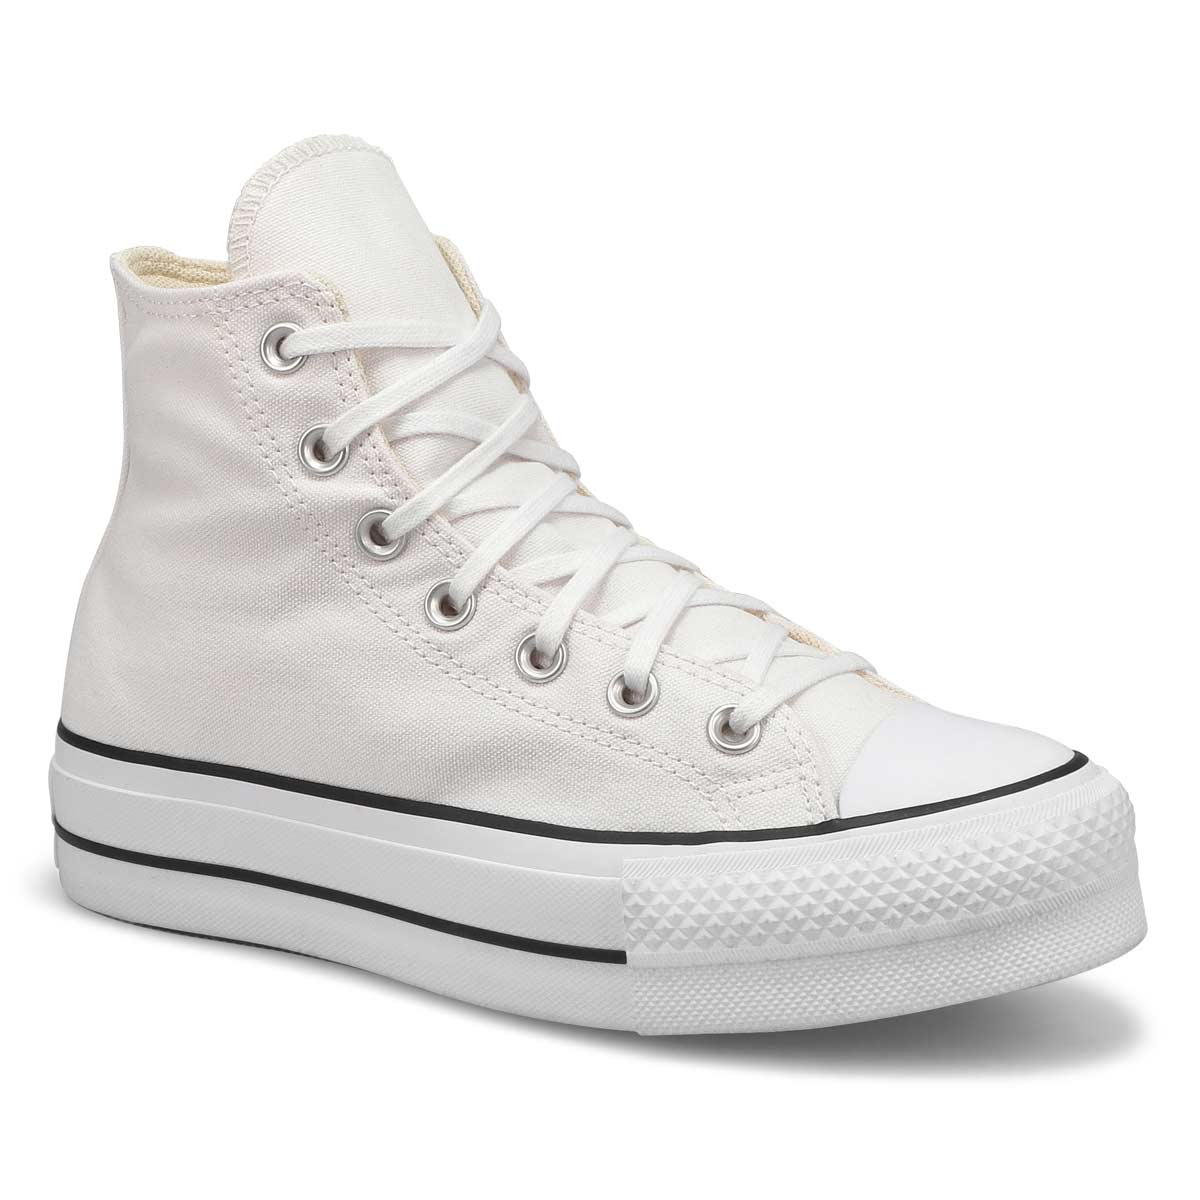 Converse Chuck Taylor All Star Short Shoes In White